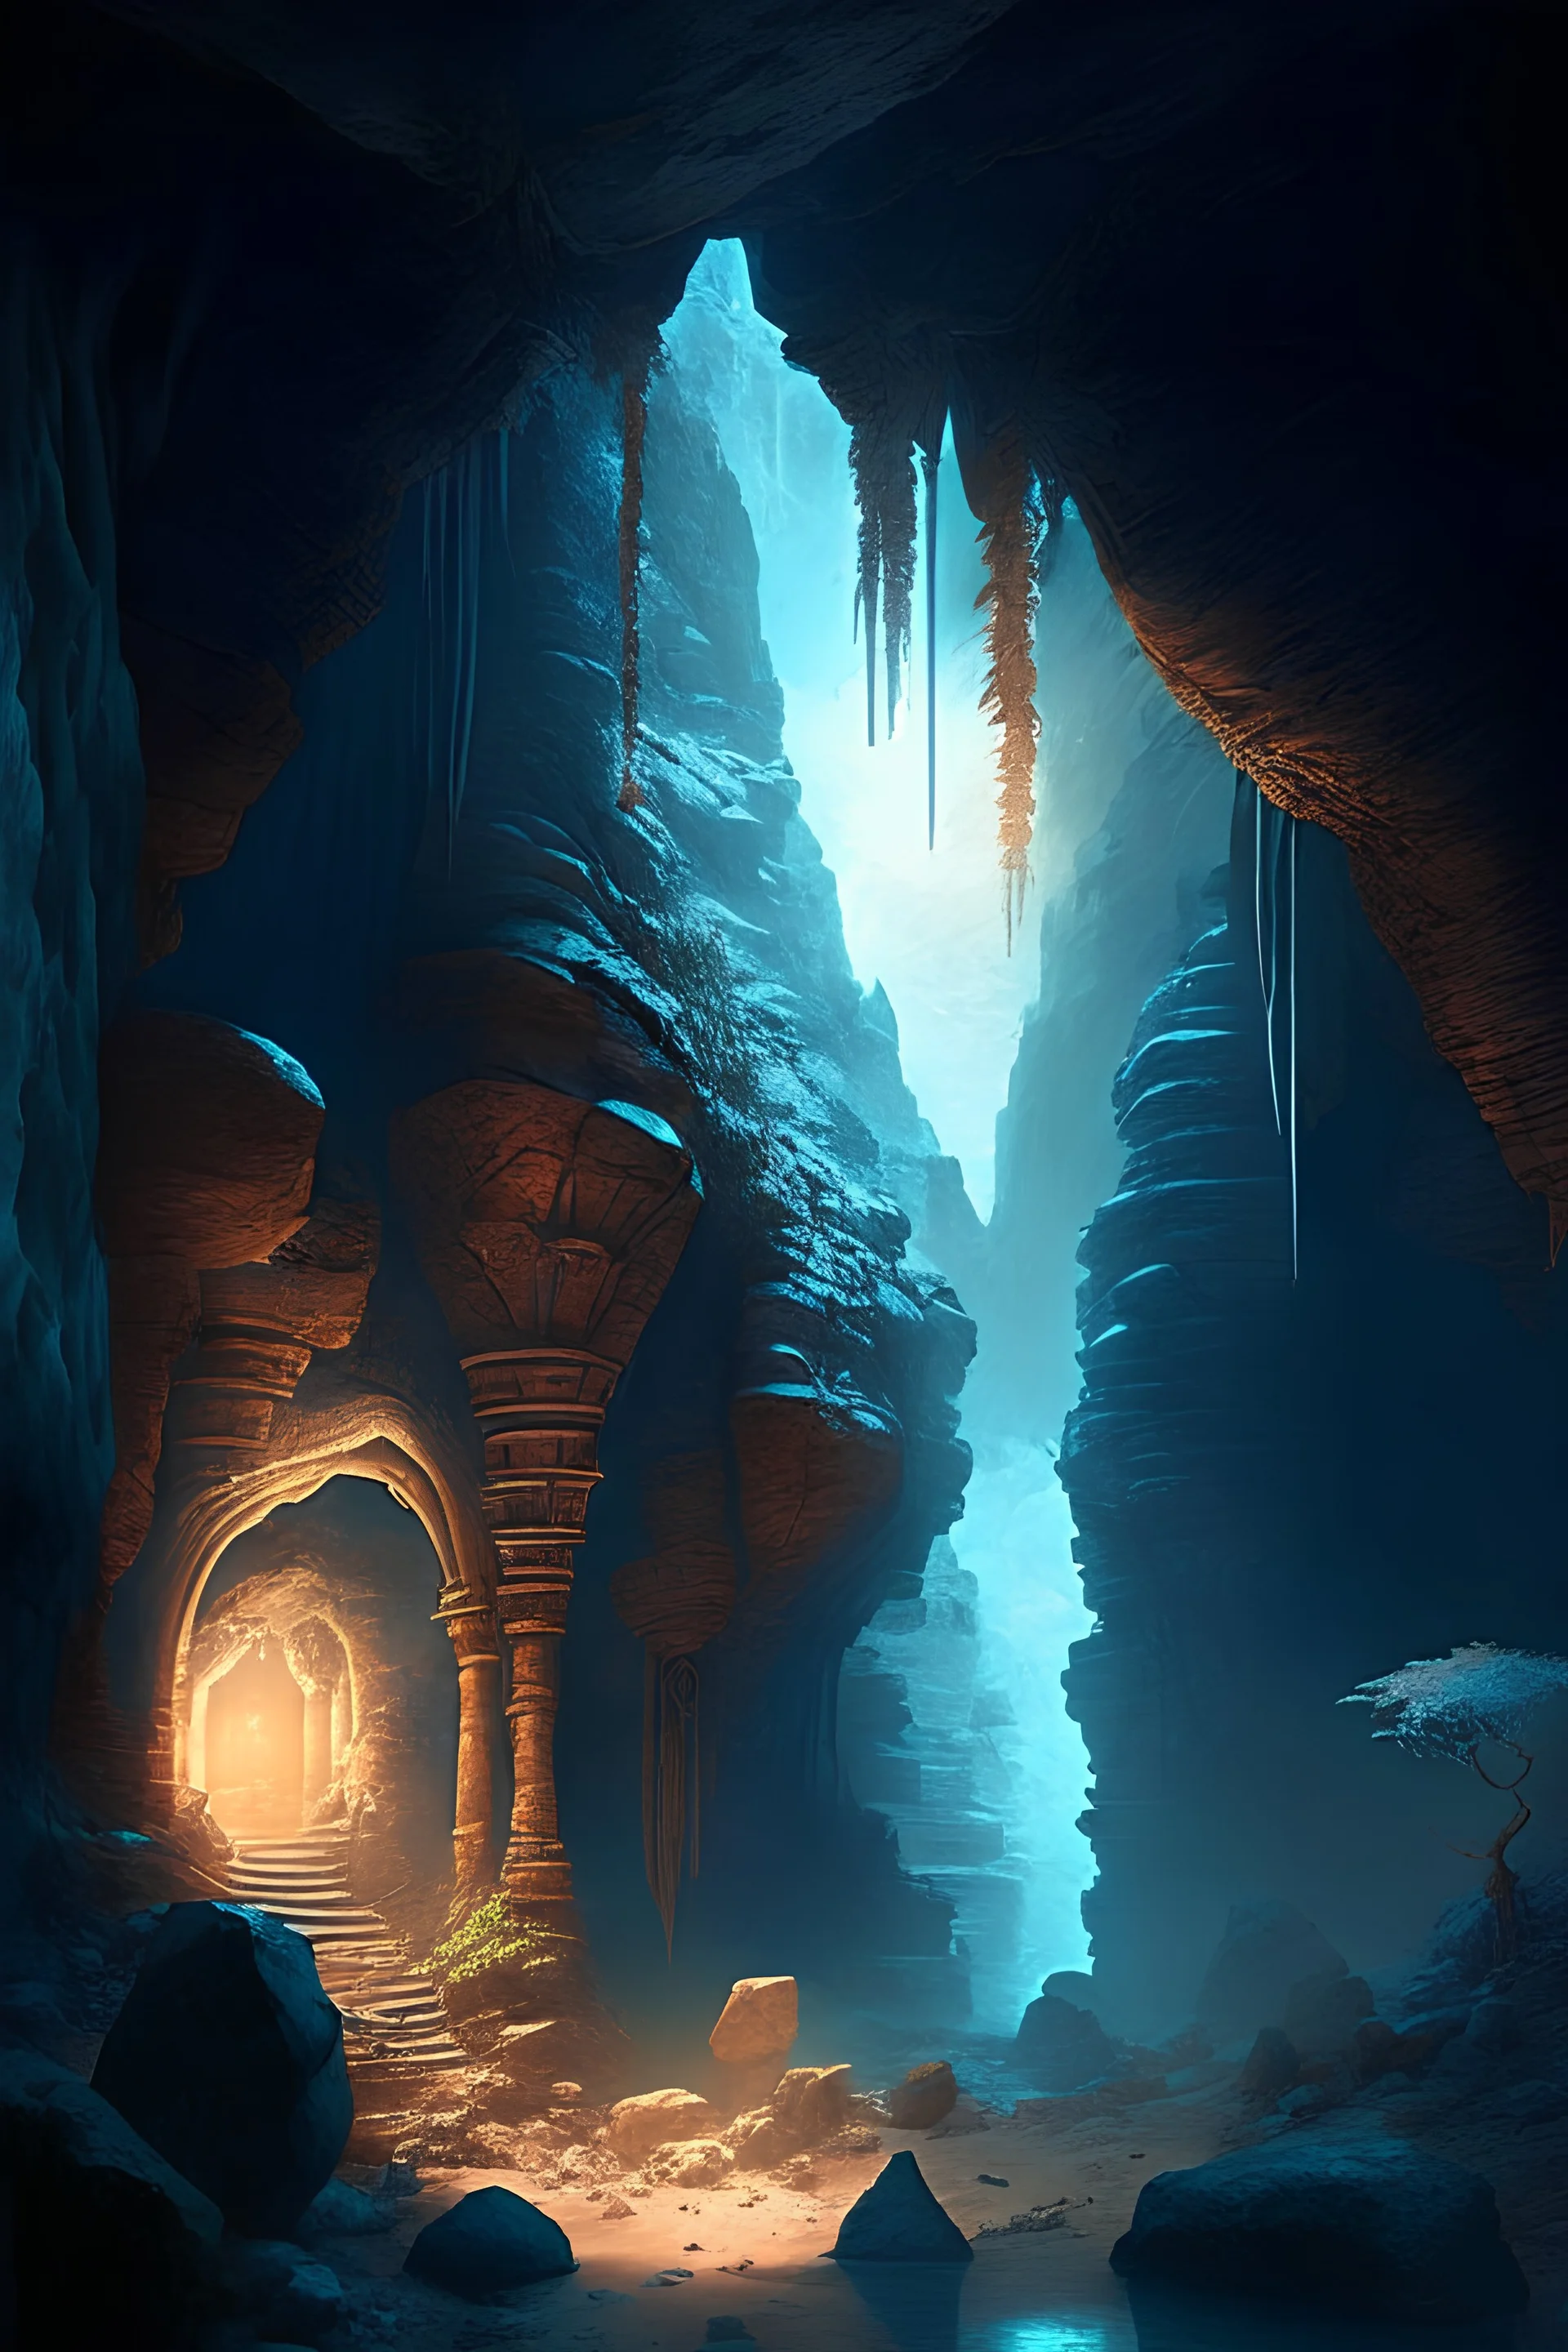 An ancient civilization hid in enchanted caves